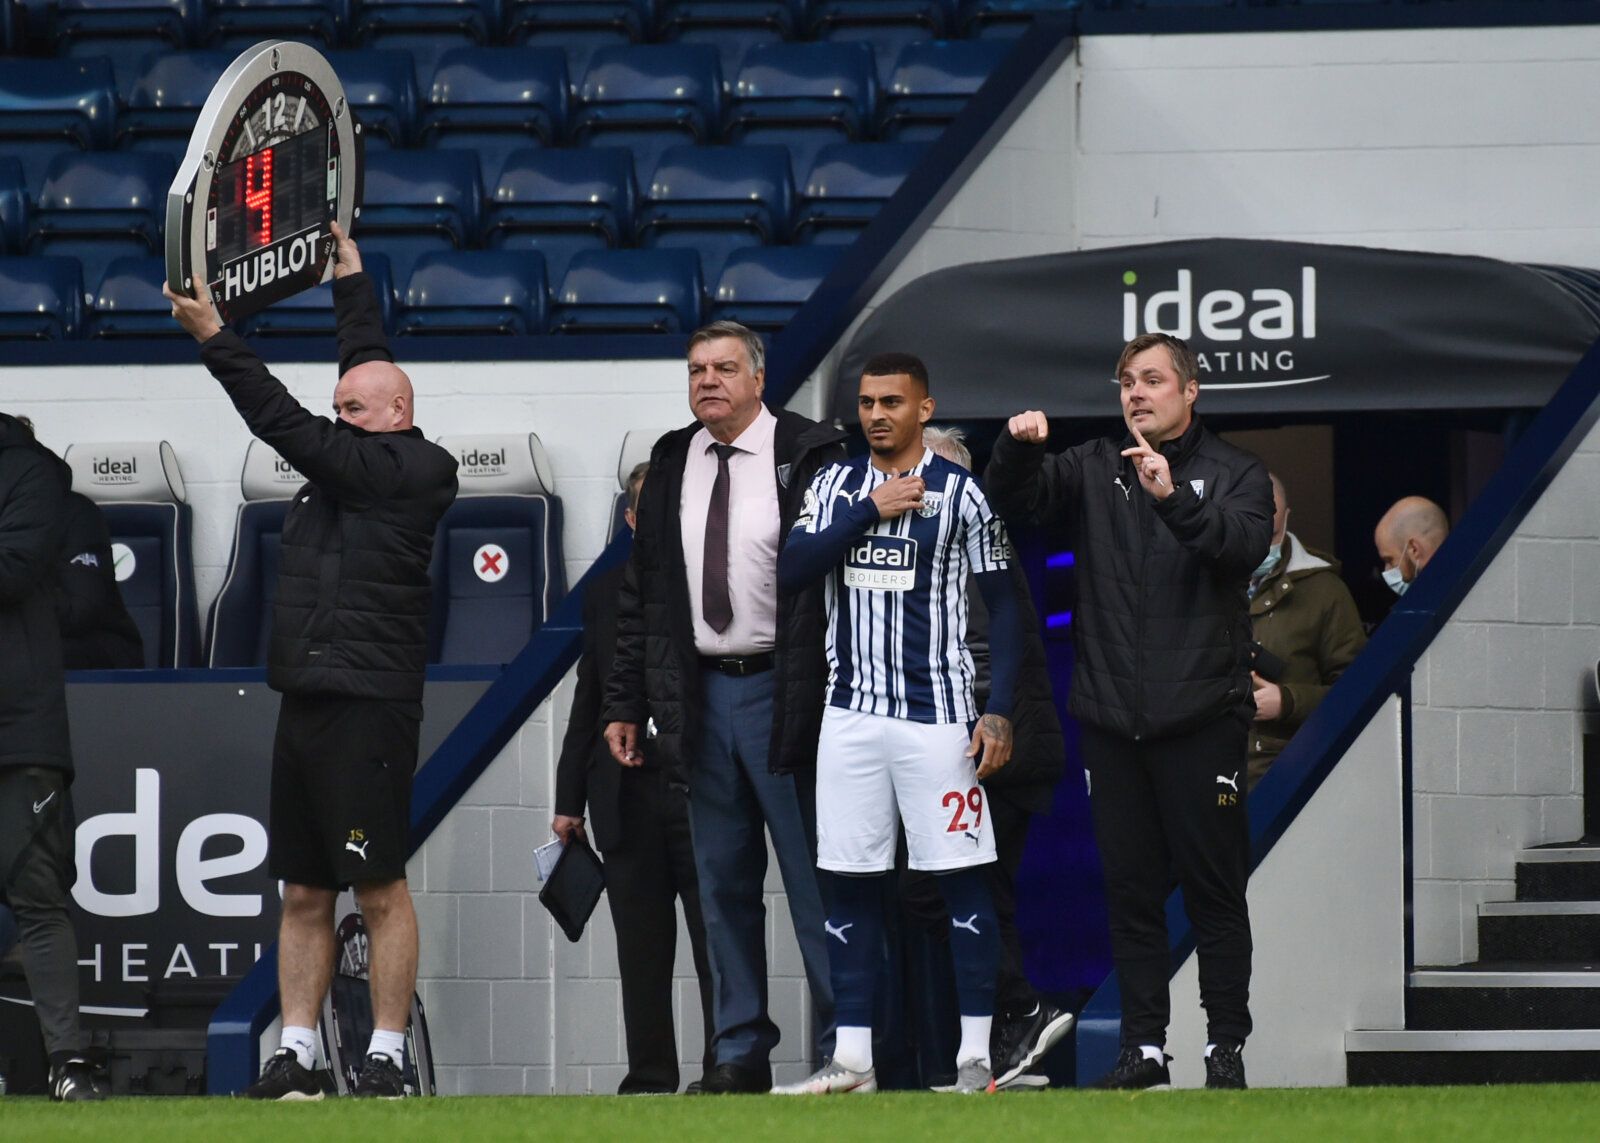 Soccer Football - Premier League - West Bromwich Albion v Liverpool - The Hawthorns, West Bromwich, Britain - May 16, 2021 West Bromwich Albion's Karlan Grant and manager Sam Allardyce Pool via REUTERS/Rui Vieira EDITORIAL USE ONLY. No use with unauthorized audio, video, data, fixture lists, club/league logos or 'live' services. Online in-match use limited to 75 images, no video emulation. No use in betting, games or single club /league/player publications.  Please contact your account represent